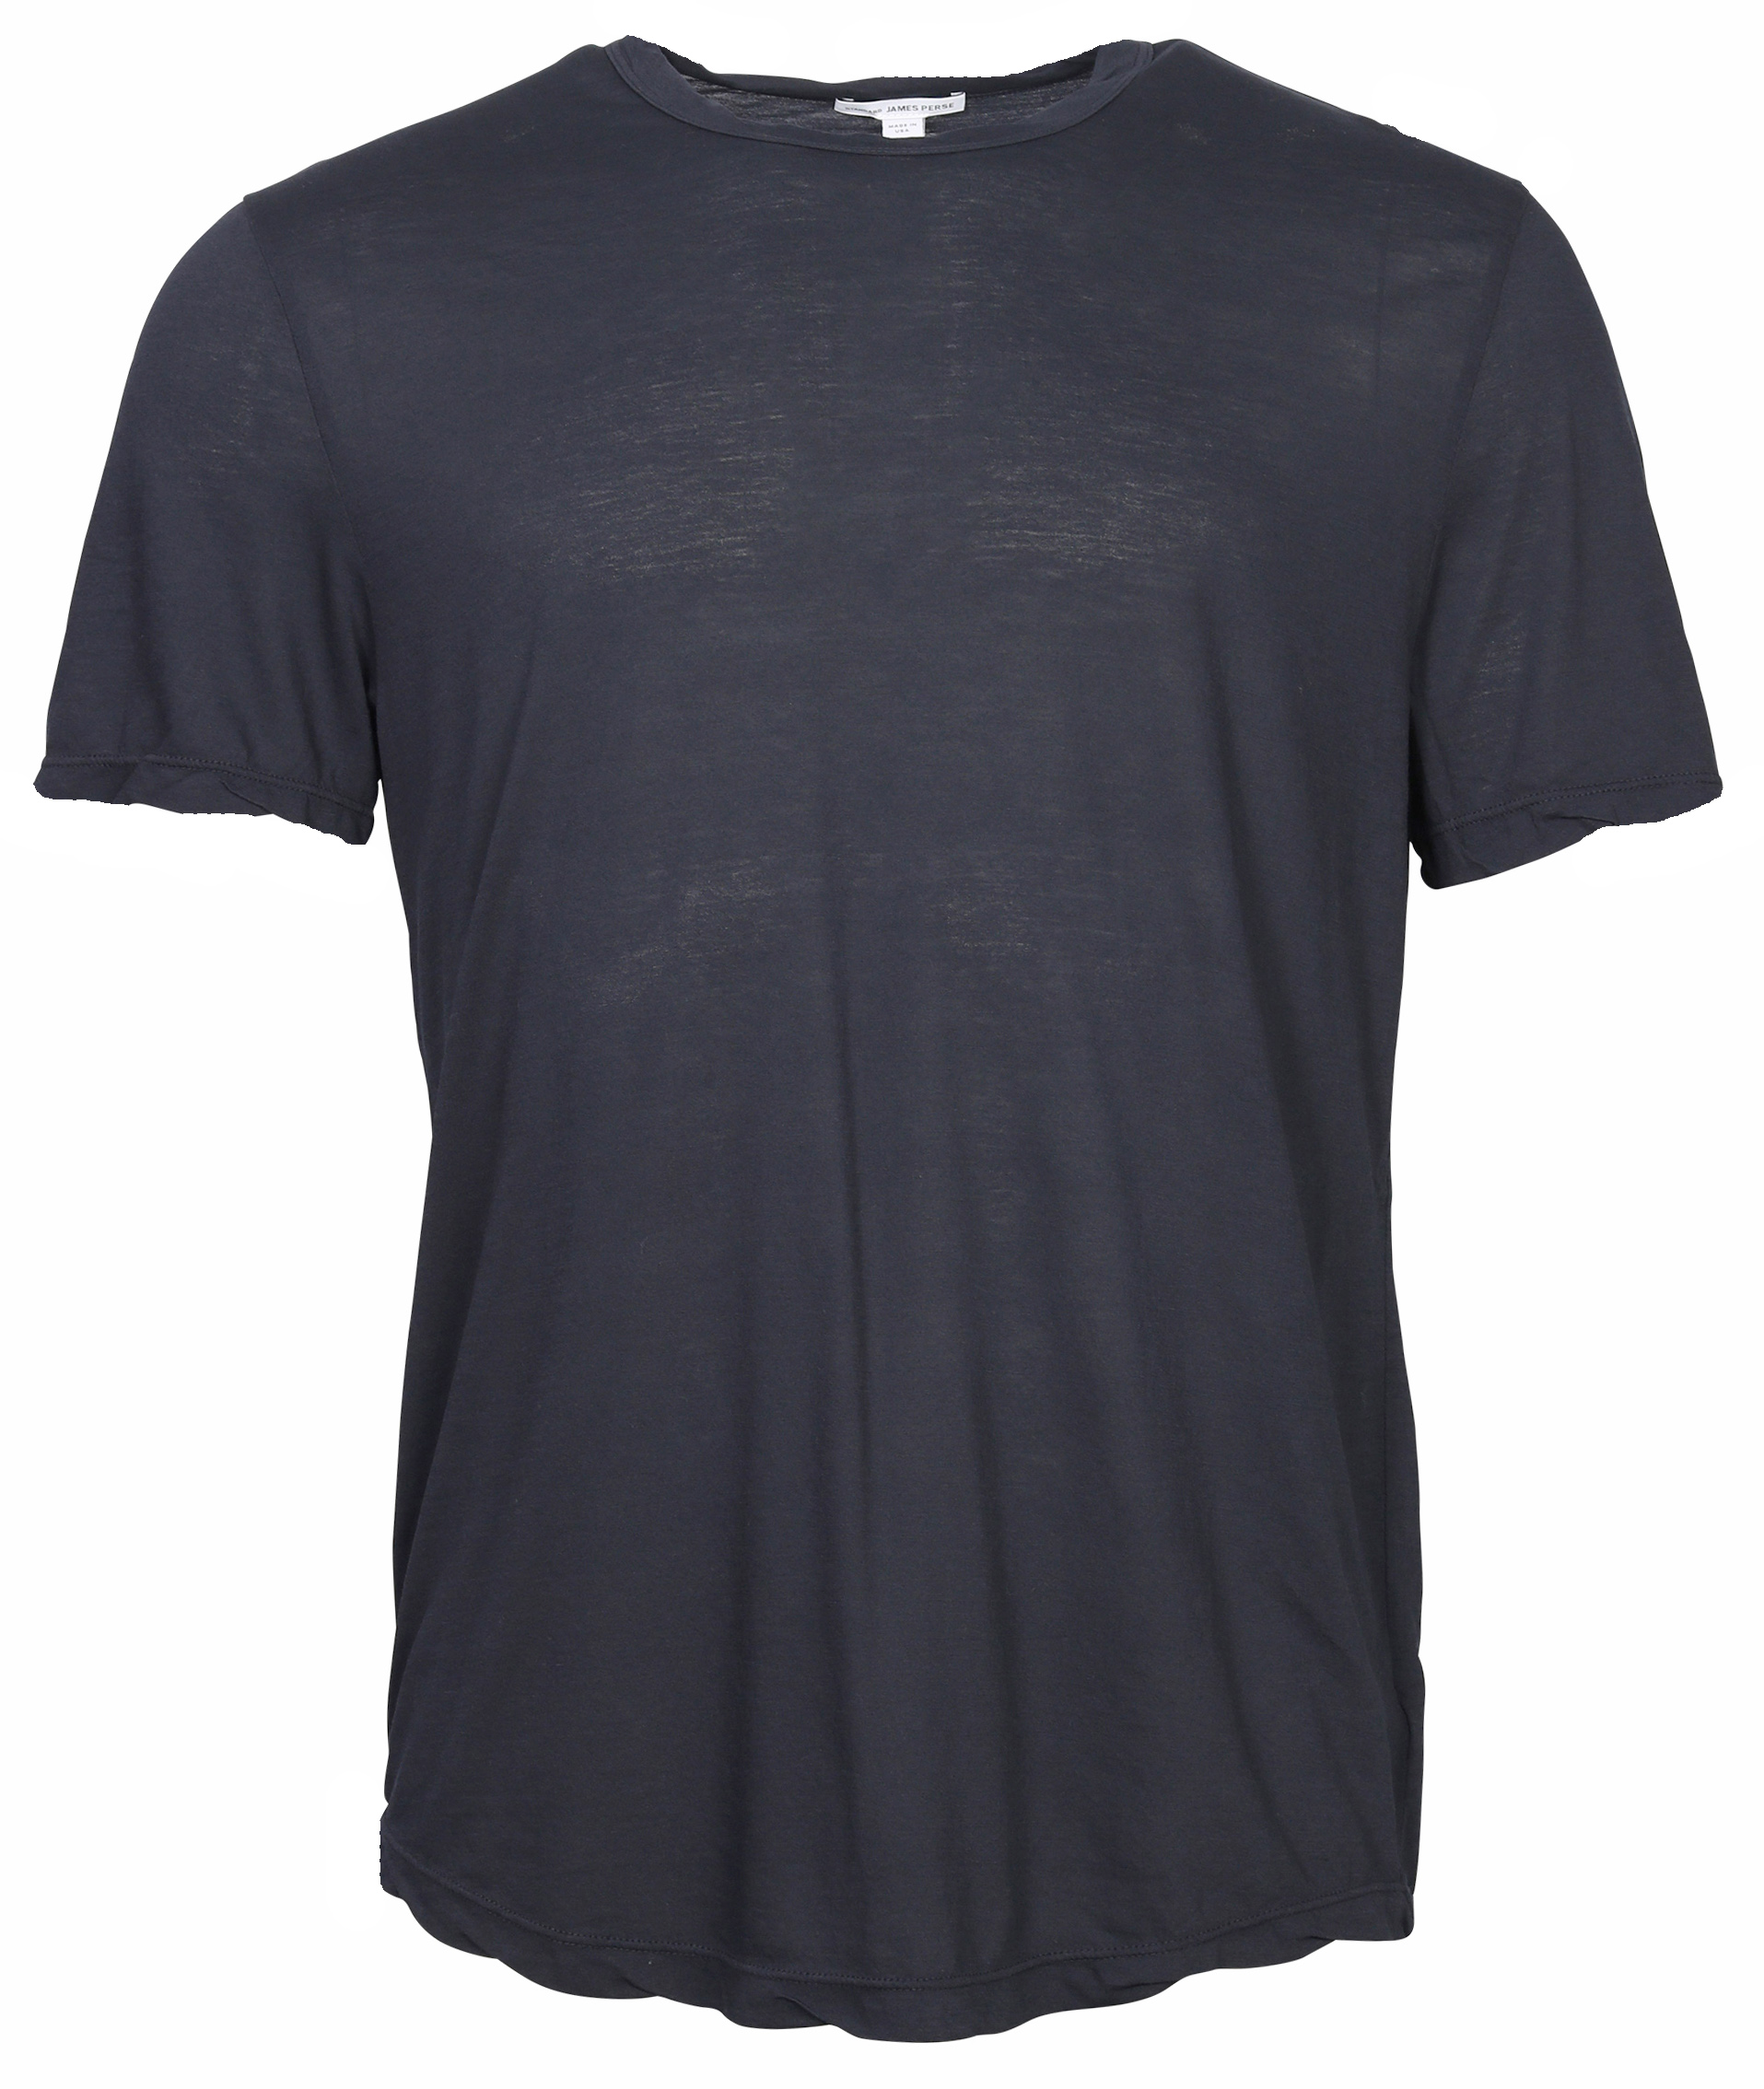 James Perse Clear Jersey Crew Neck Navy